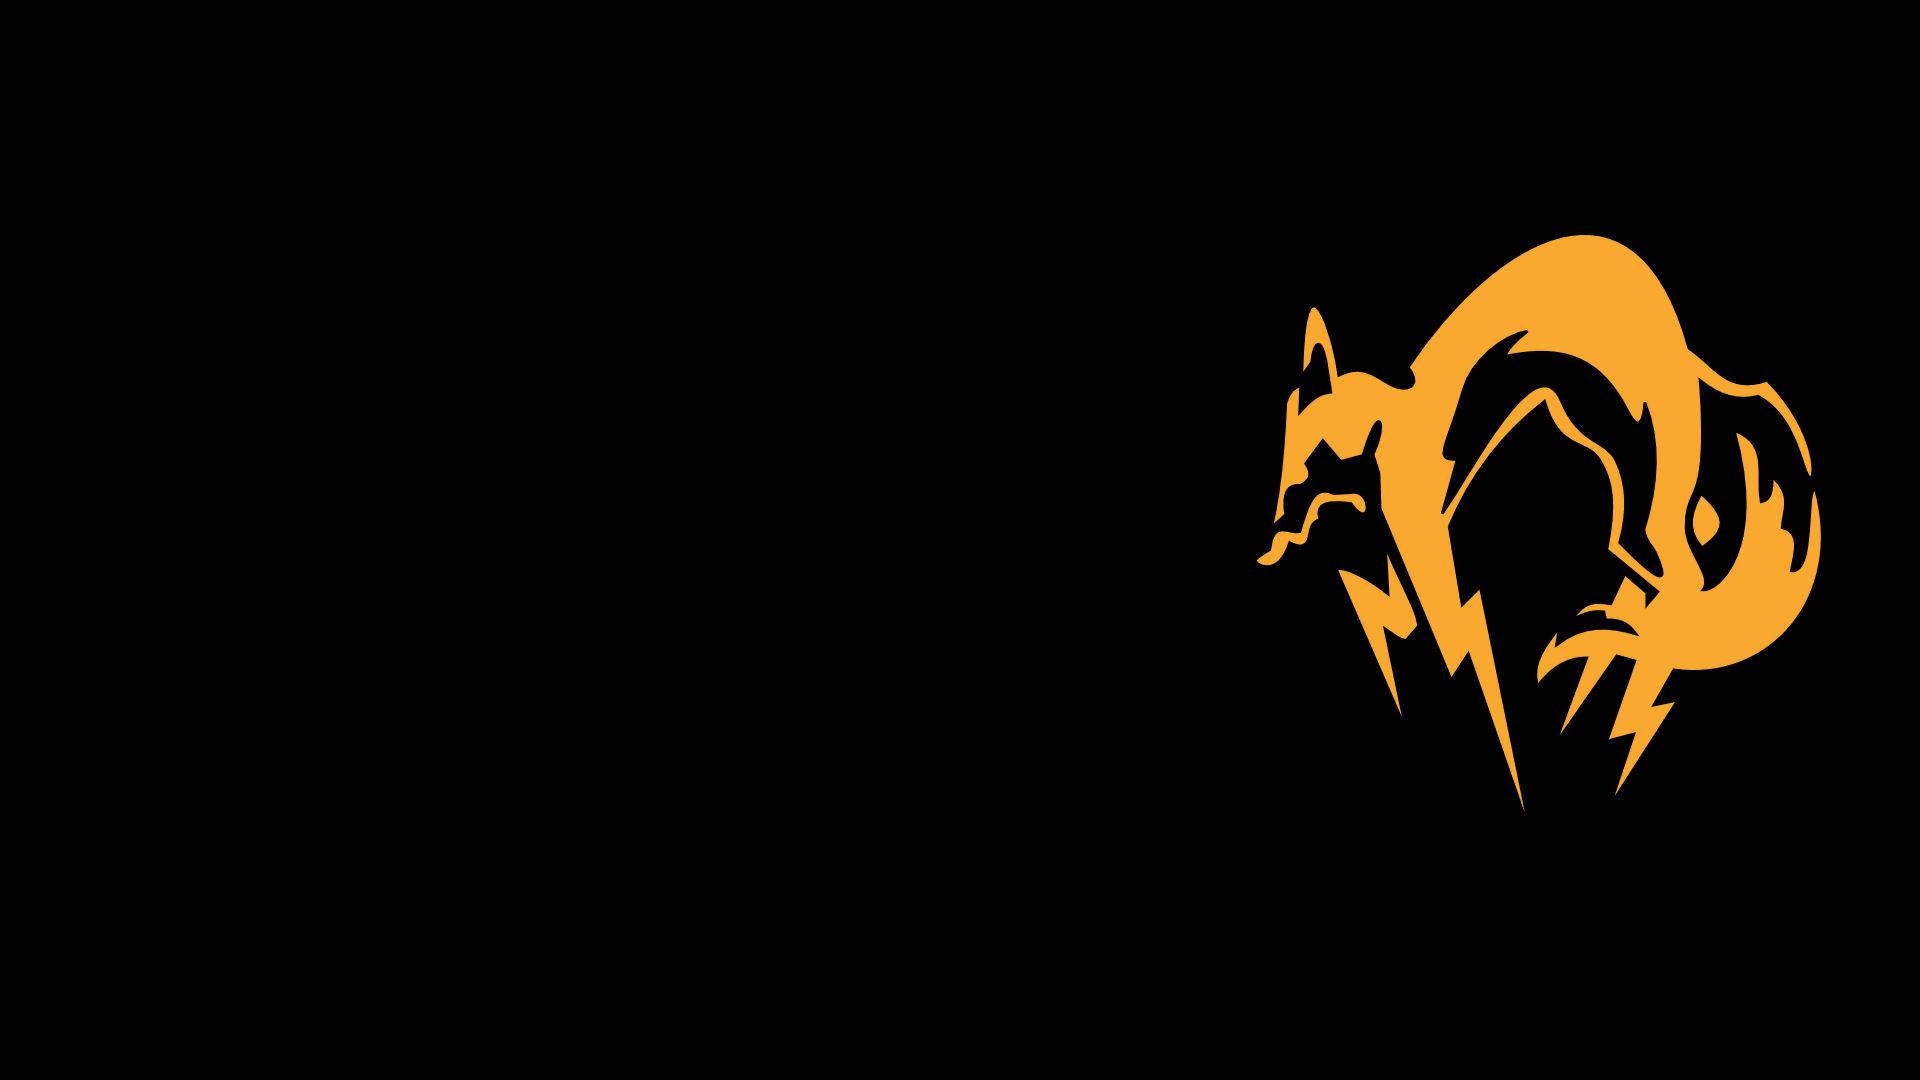 Foxhound Wallpaper 1920x1080 Image & Picture